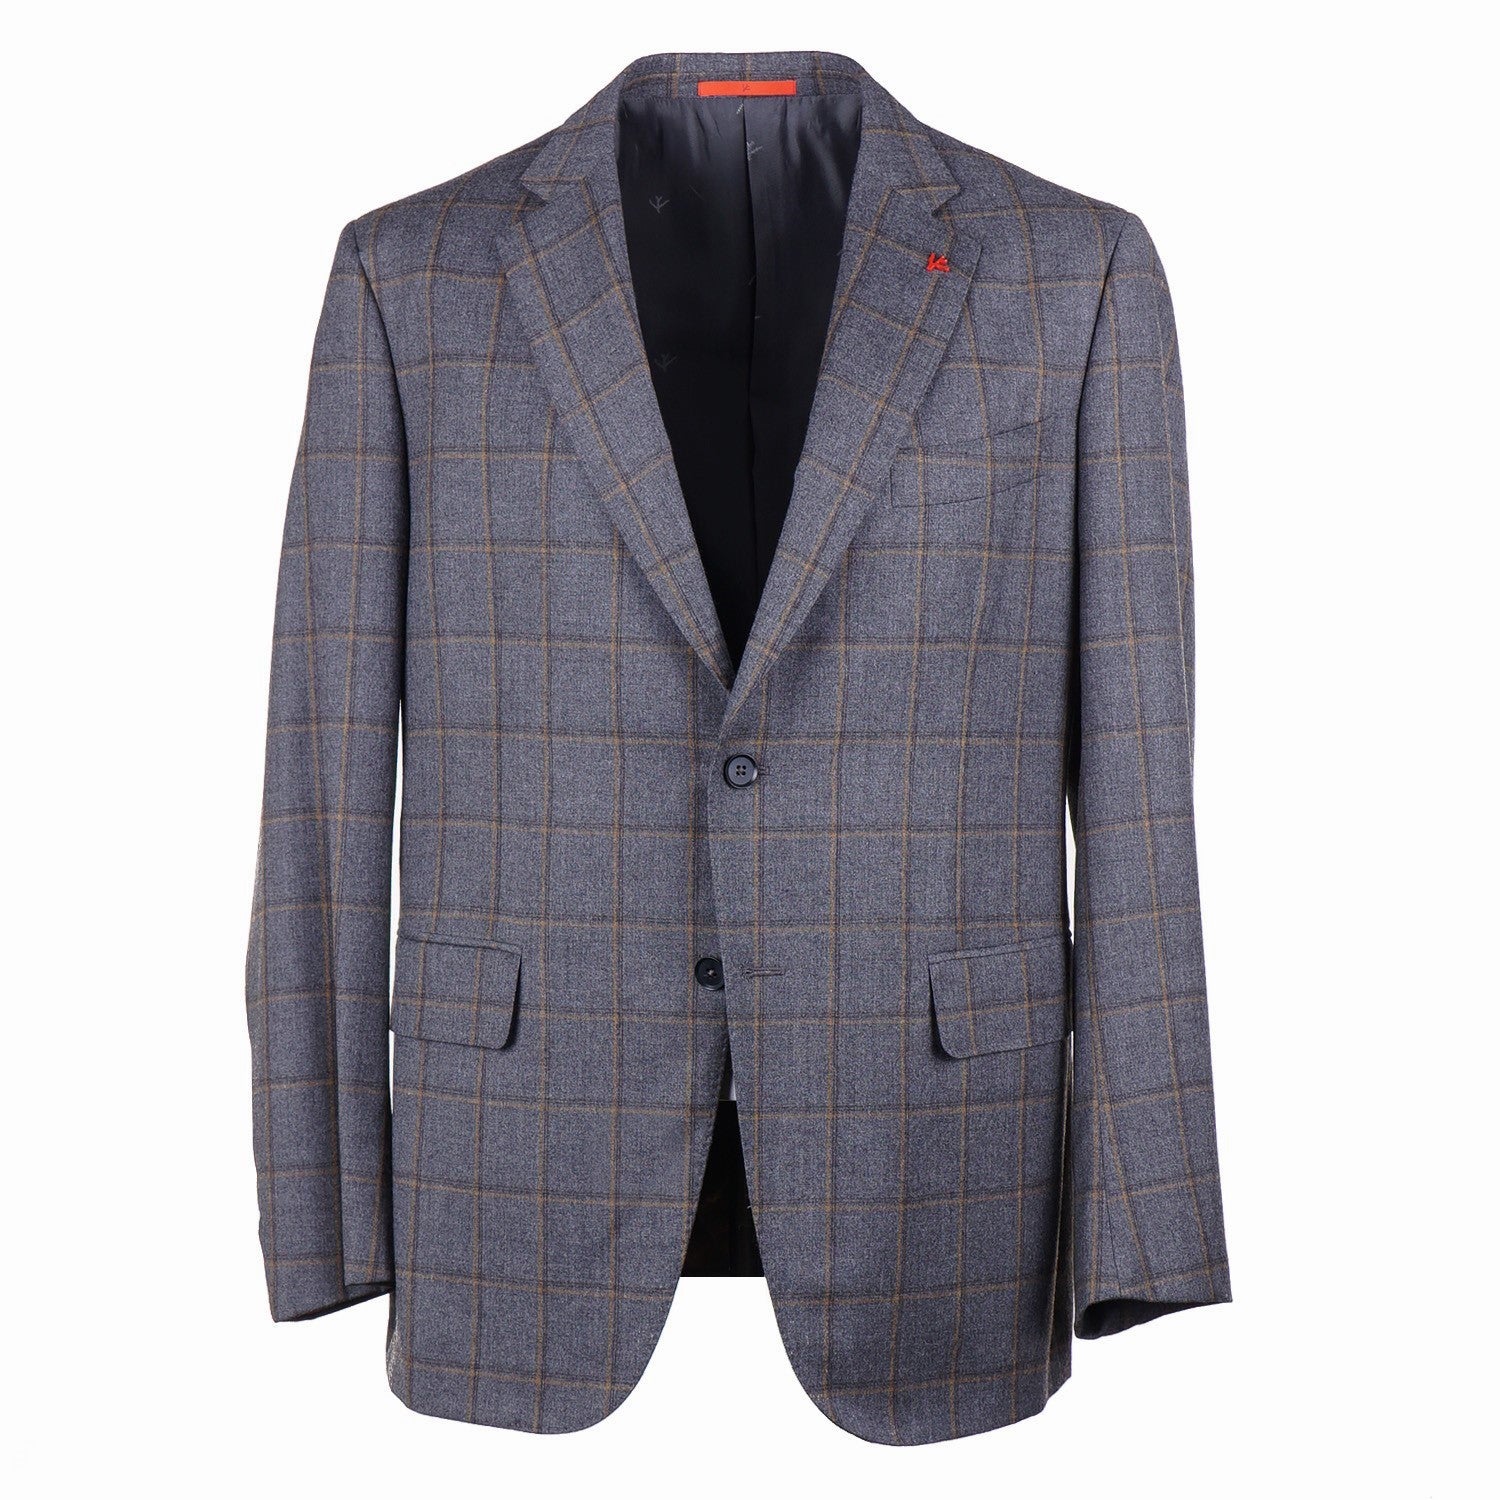 Isaia Slim-Fit Wool-Cashmere Suit - Top Shelf Apparel